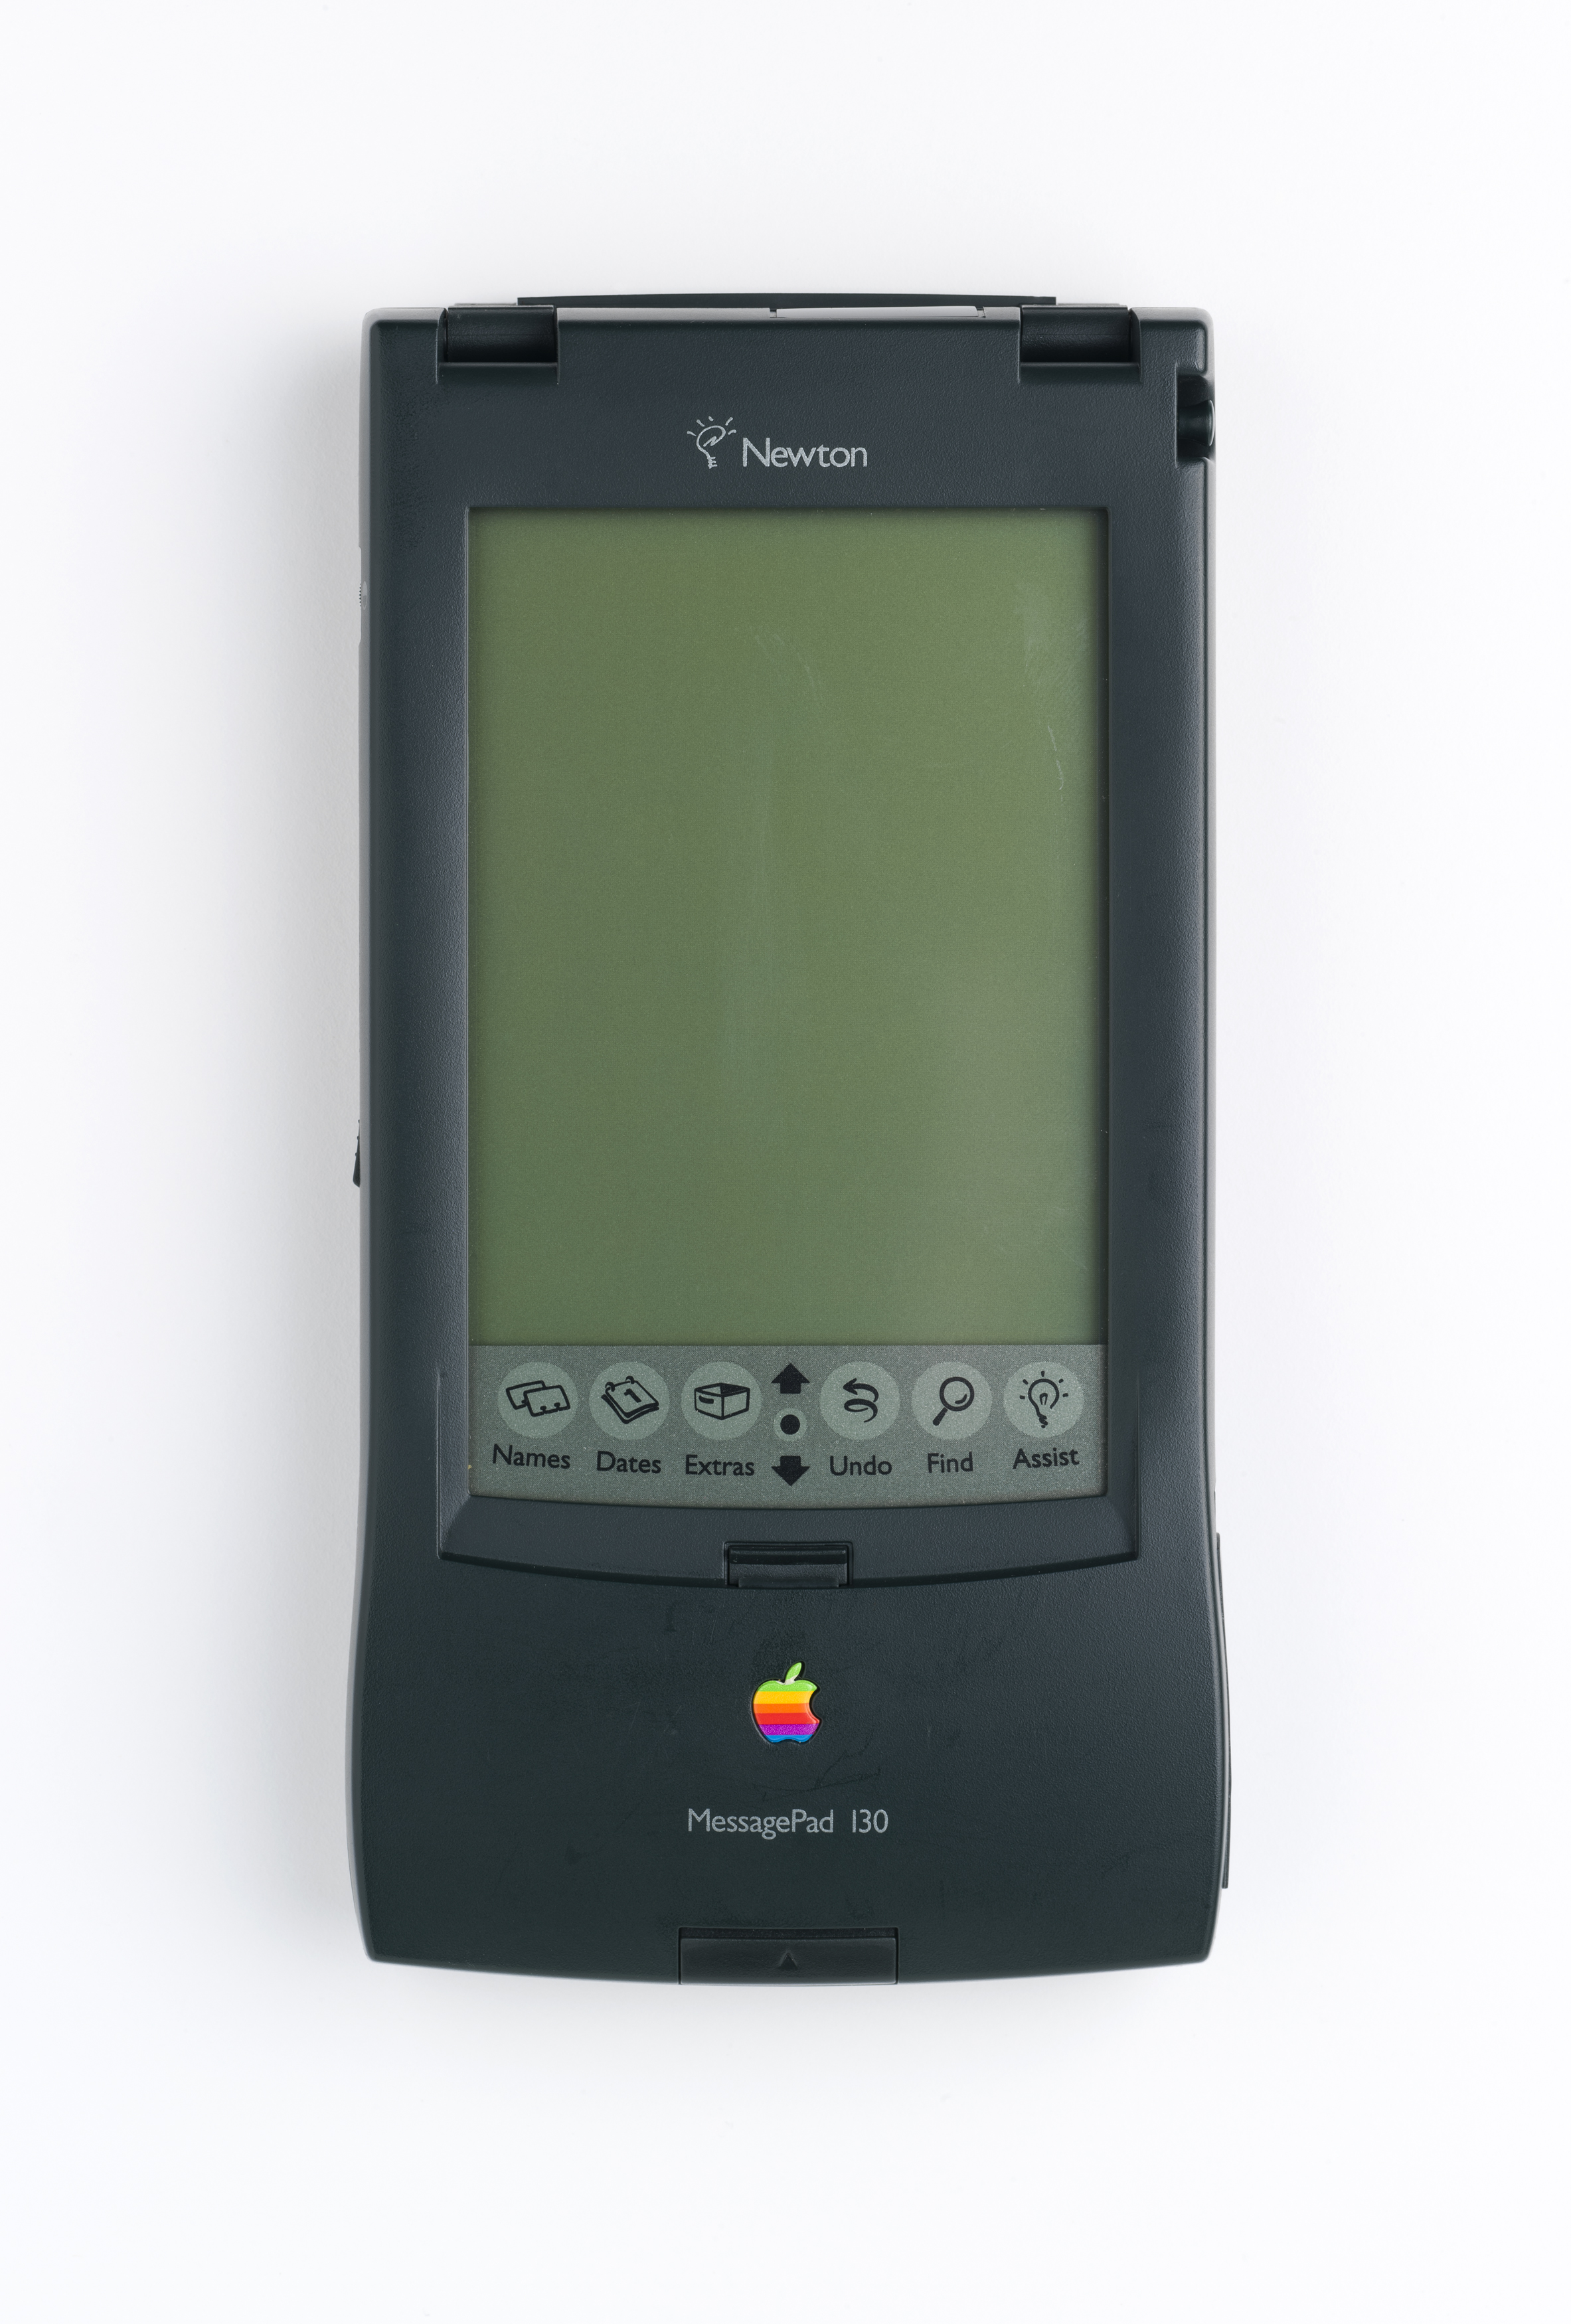 Powerhouse Collection - Apple Newton MessagePad 130 personal